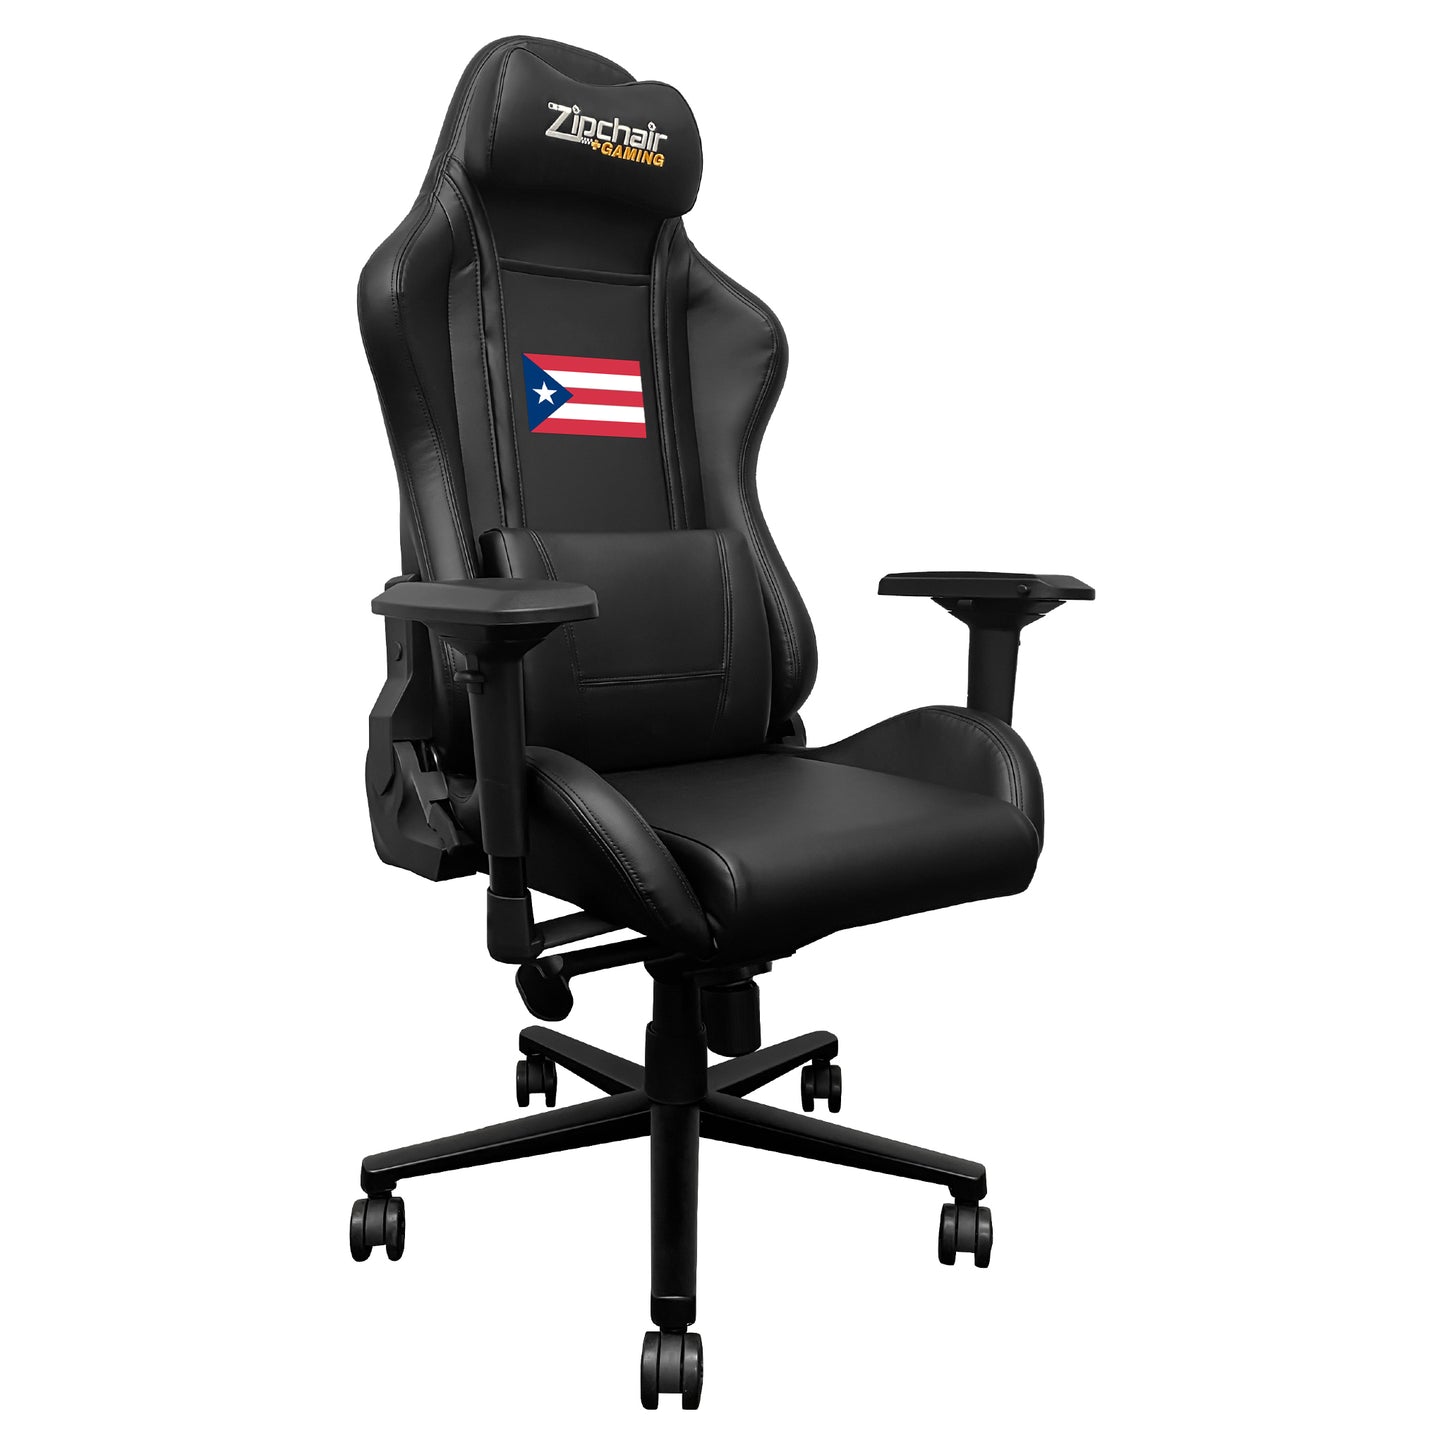 Xpression Pro Gaming Chair with Puerto Rican Flag Logo